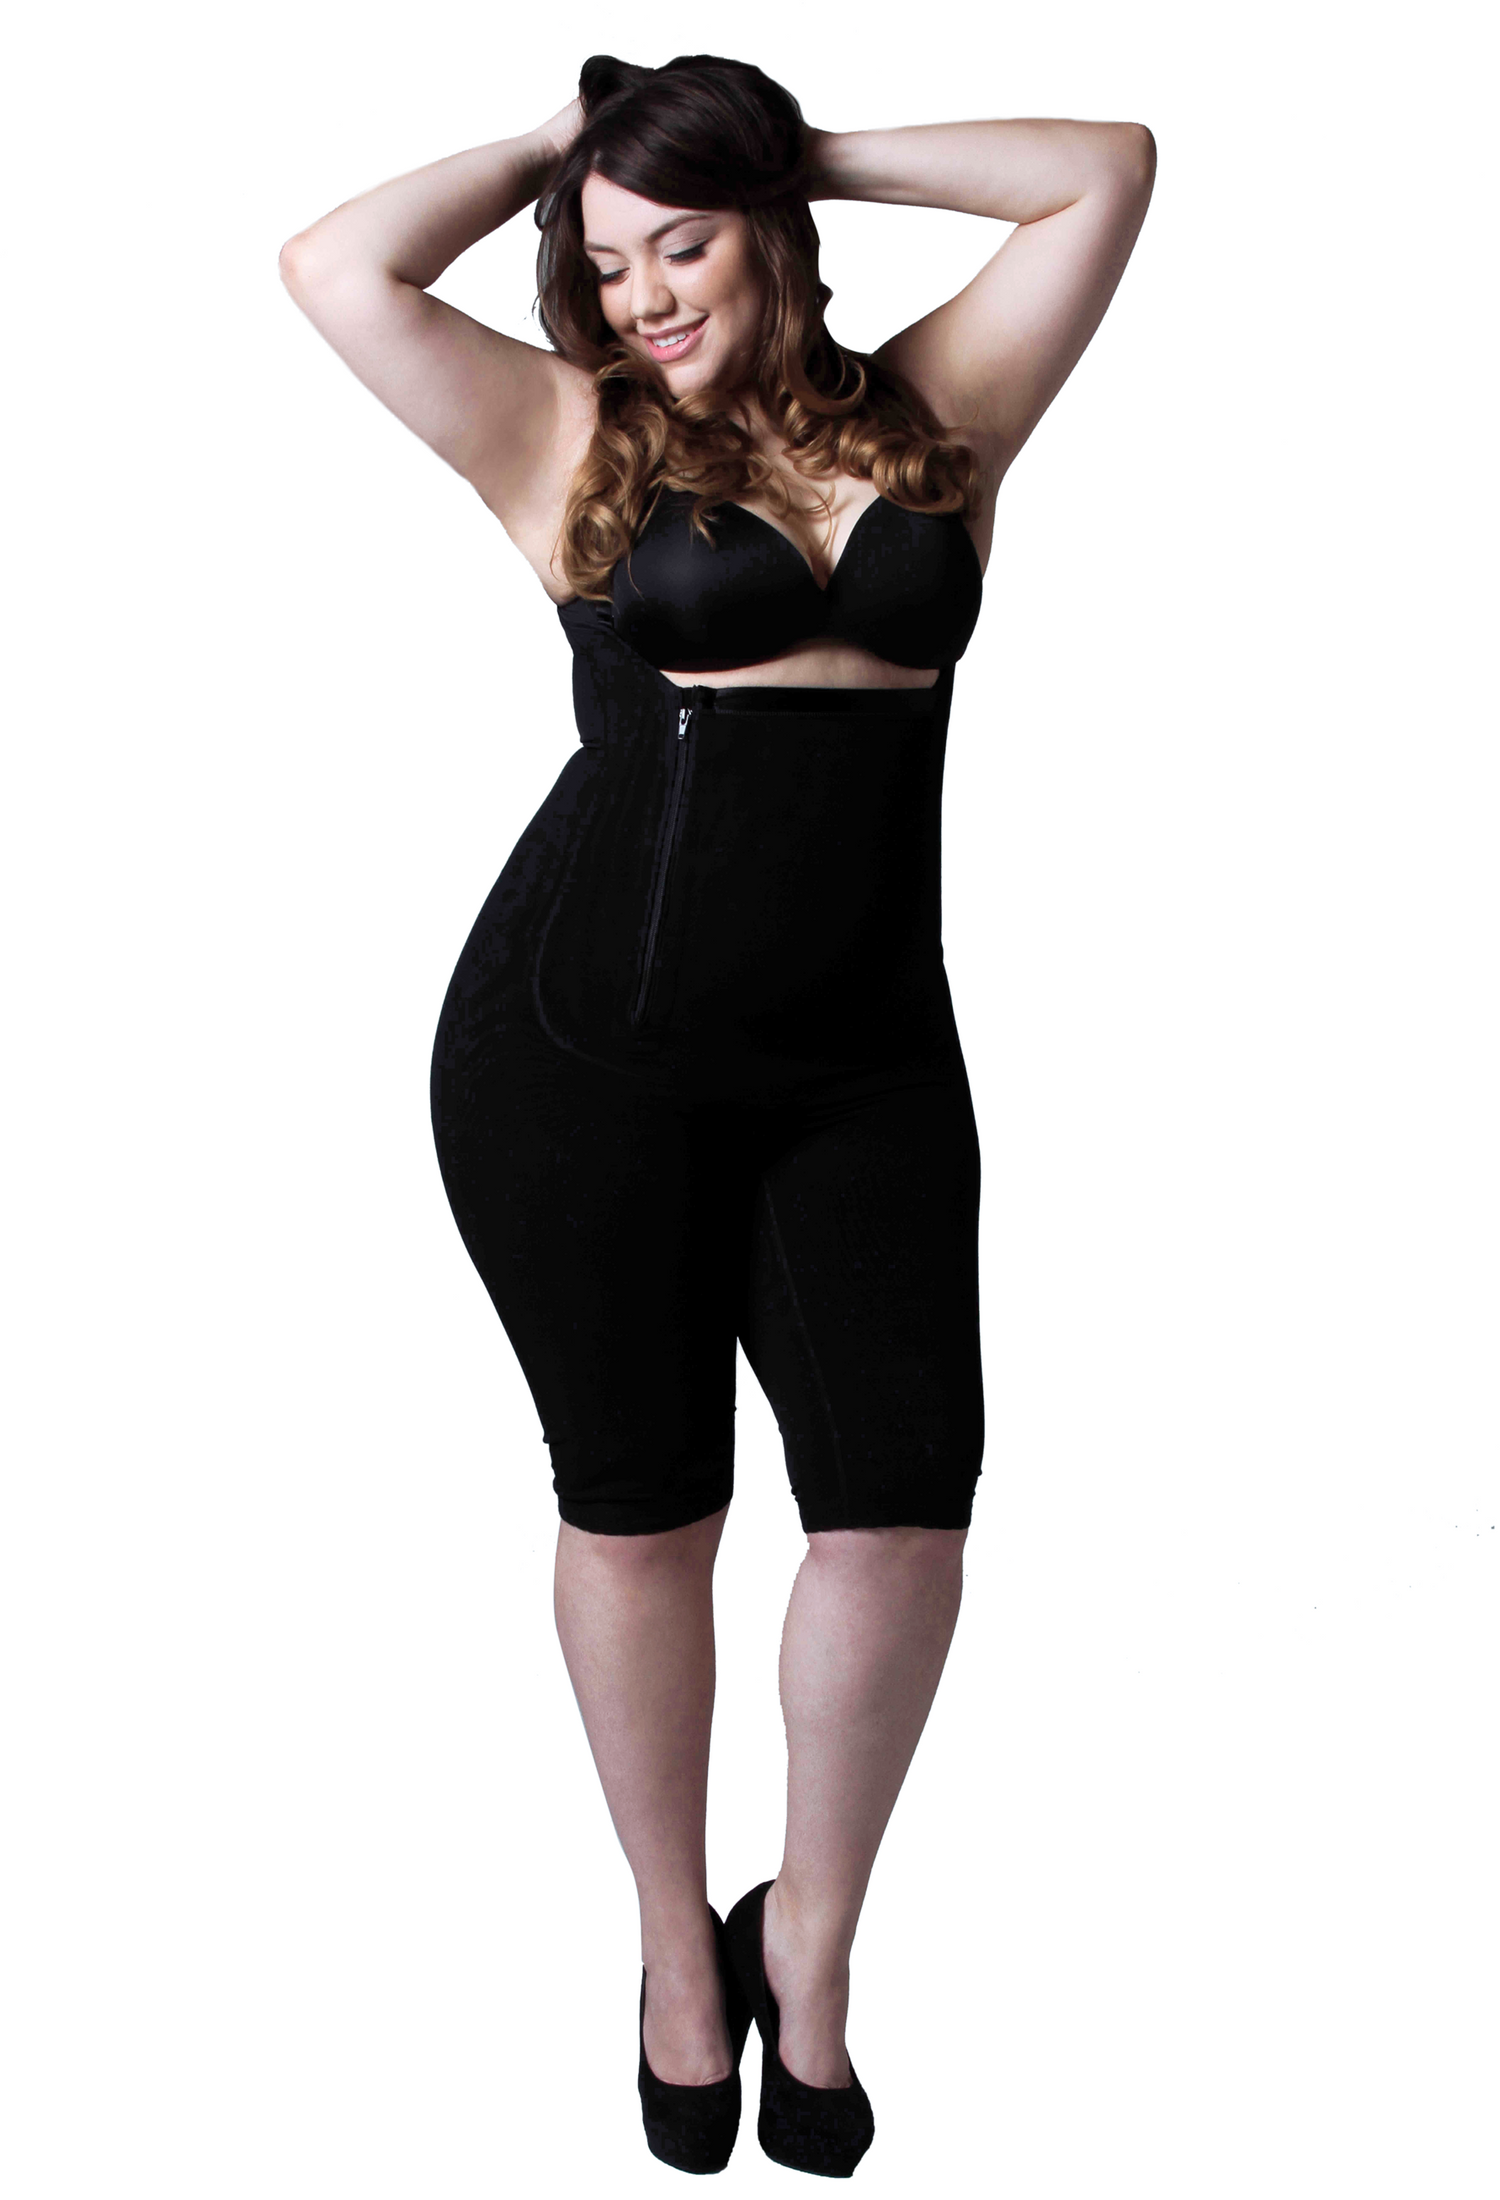 Why Shapewear Works? - ahead of the curve